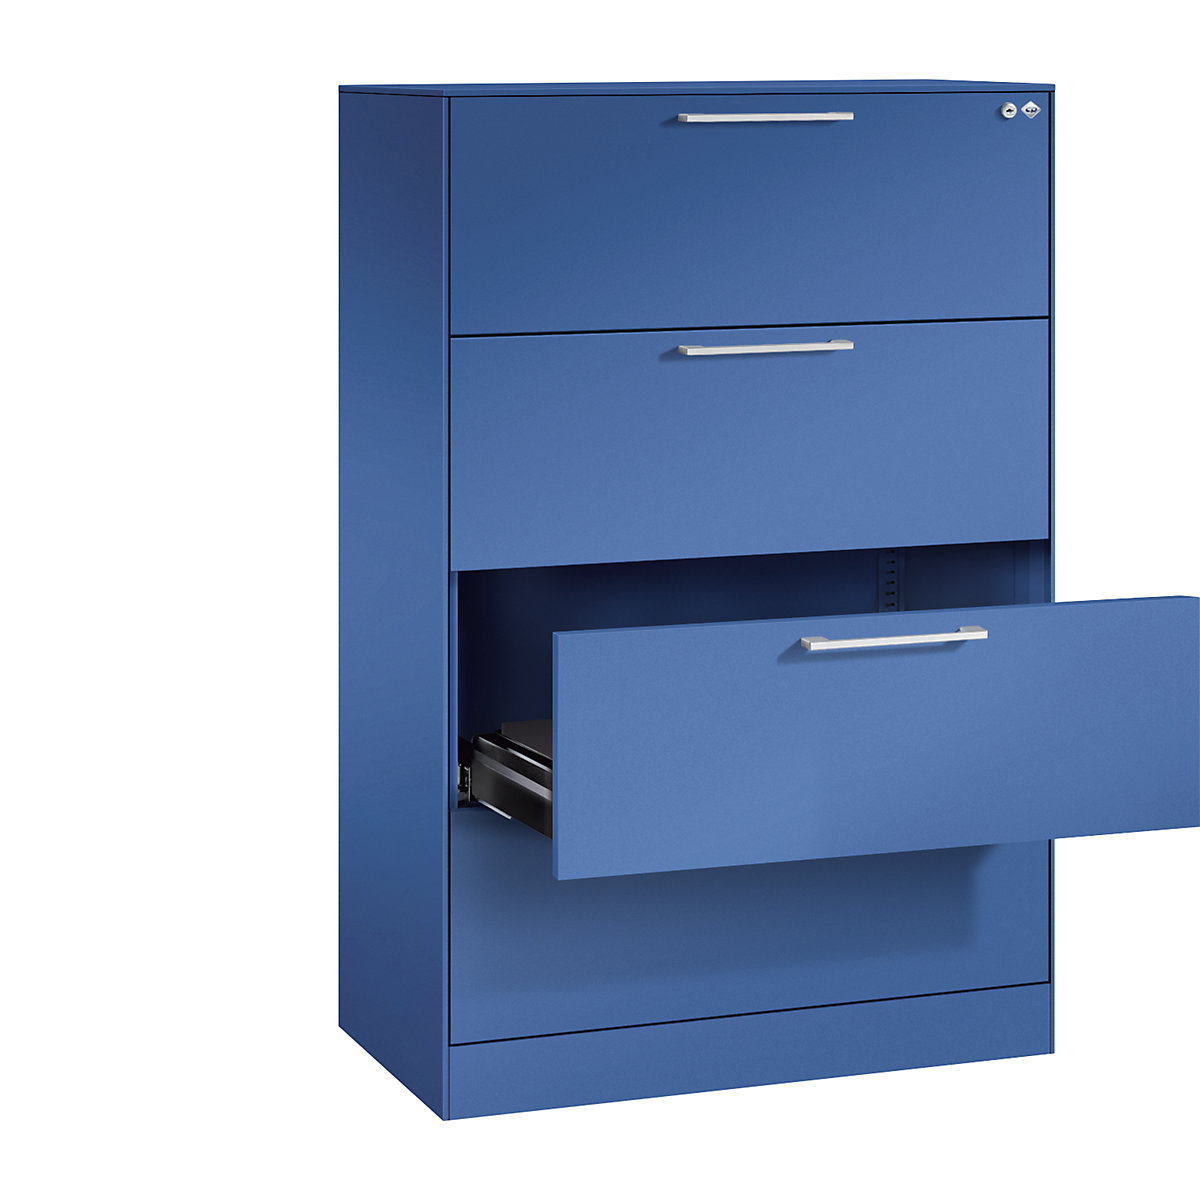 ASISTO card file cabinet – C+P, height 1292 mm, with 4 drawers, A4 landscape, gentian blue/gentian blue-12